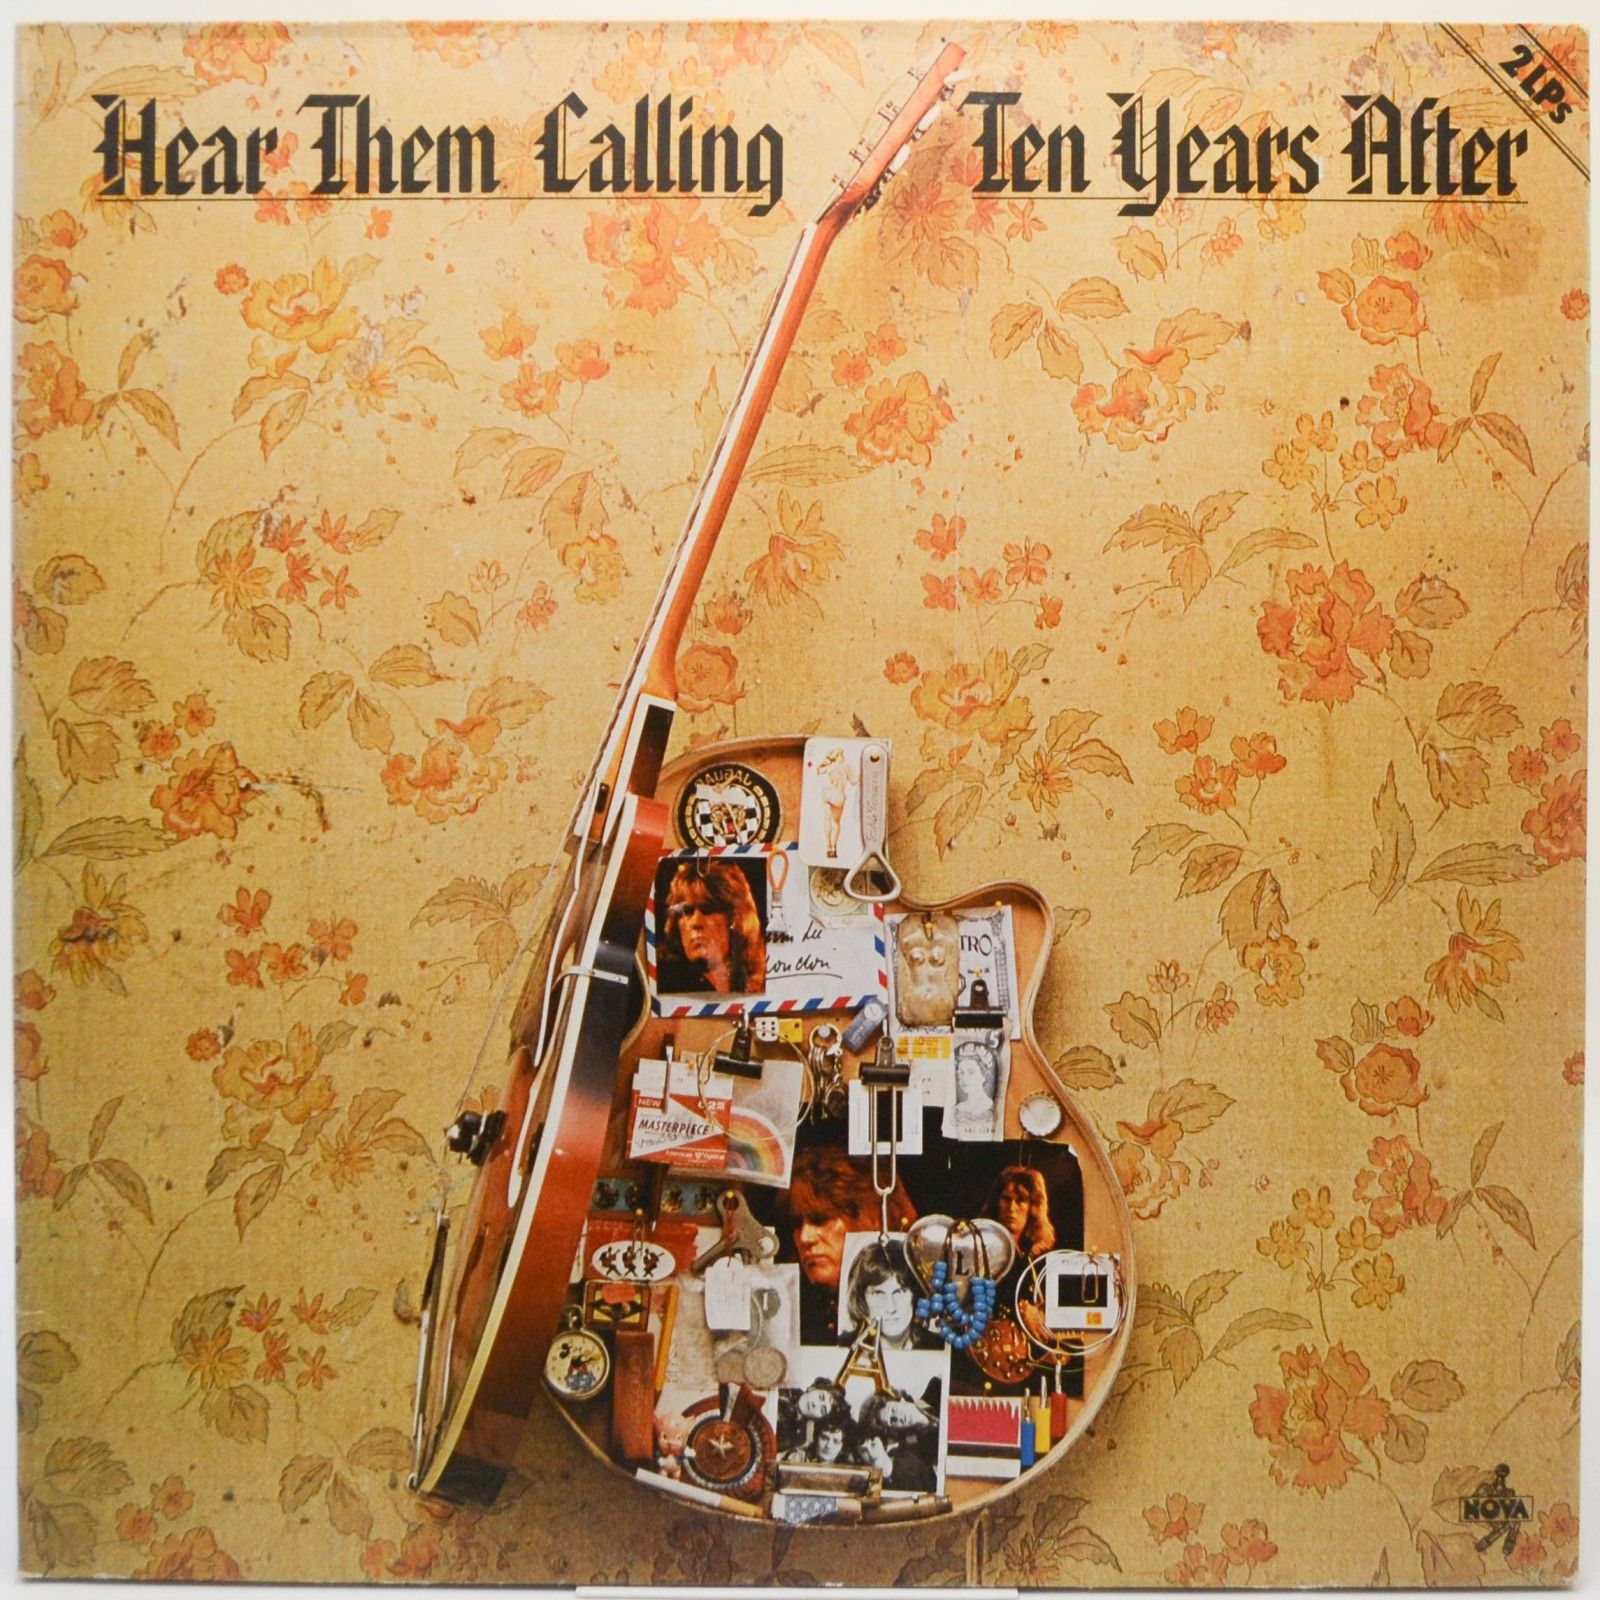 Hear them calling. Ten years after. Ten years after a Sting in the Tale. Ten years after photos.